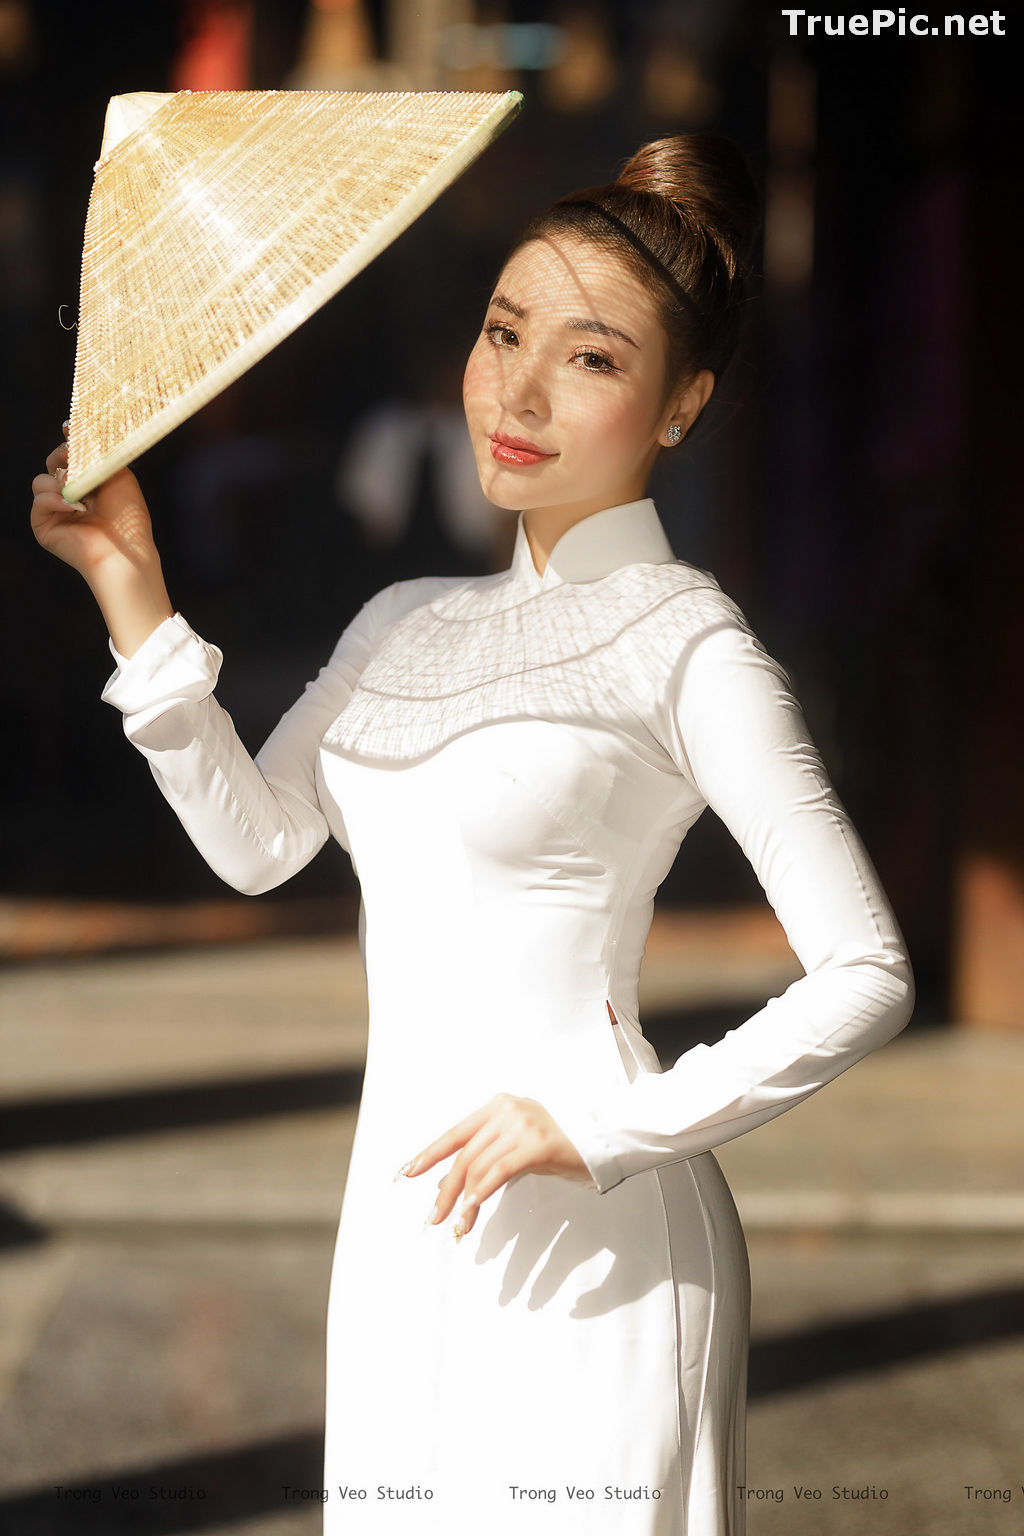 Image The Beauty of Vietnamese Girls with Traditional Dress (Ao Dai) #2 - TruePic.net - Picture-47